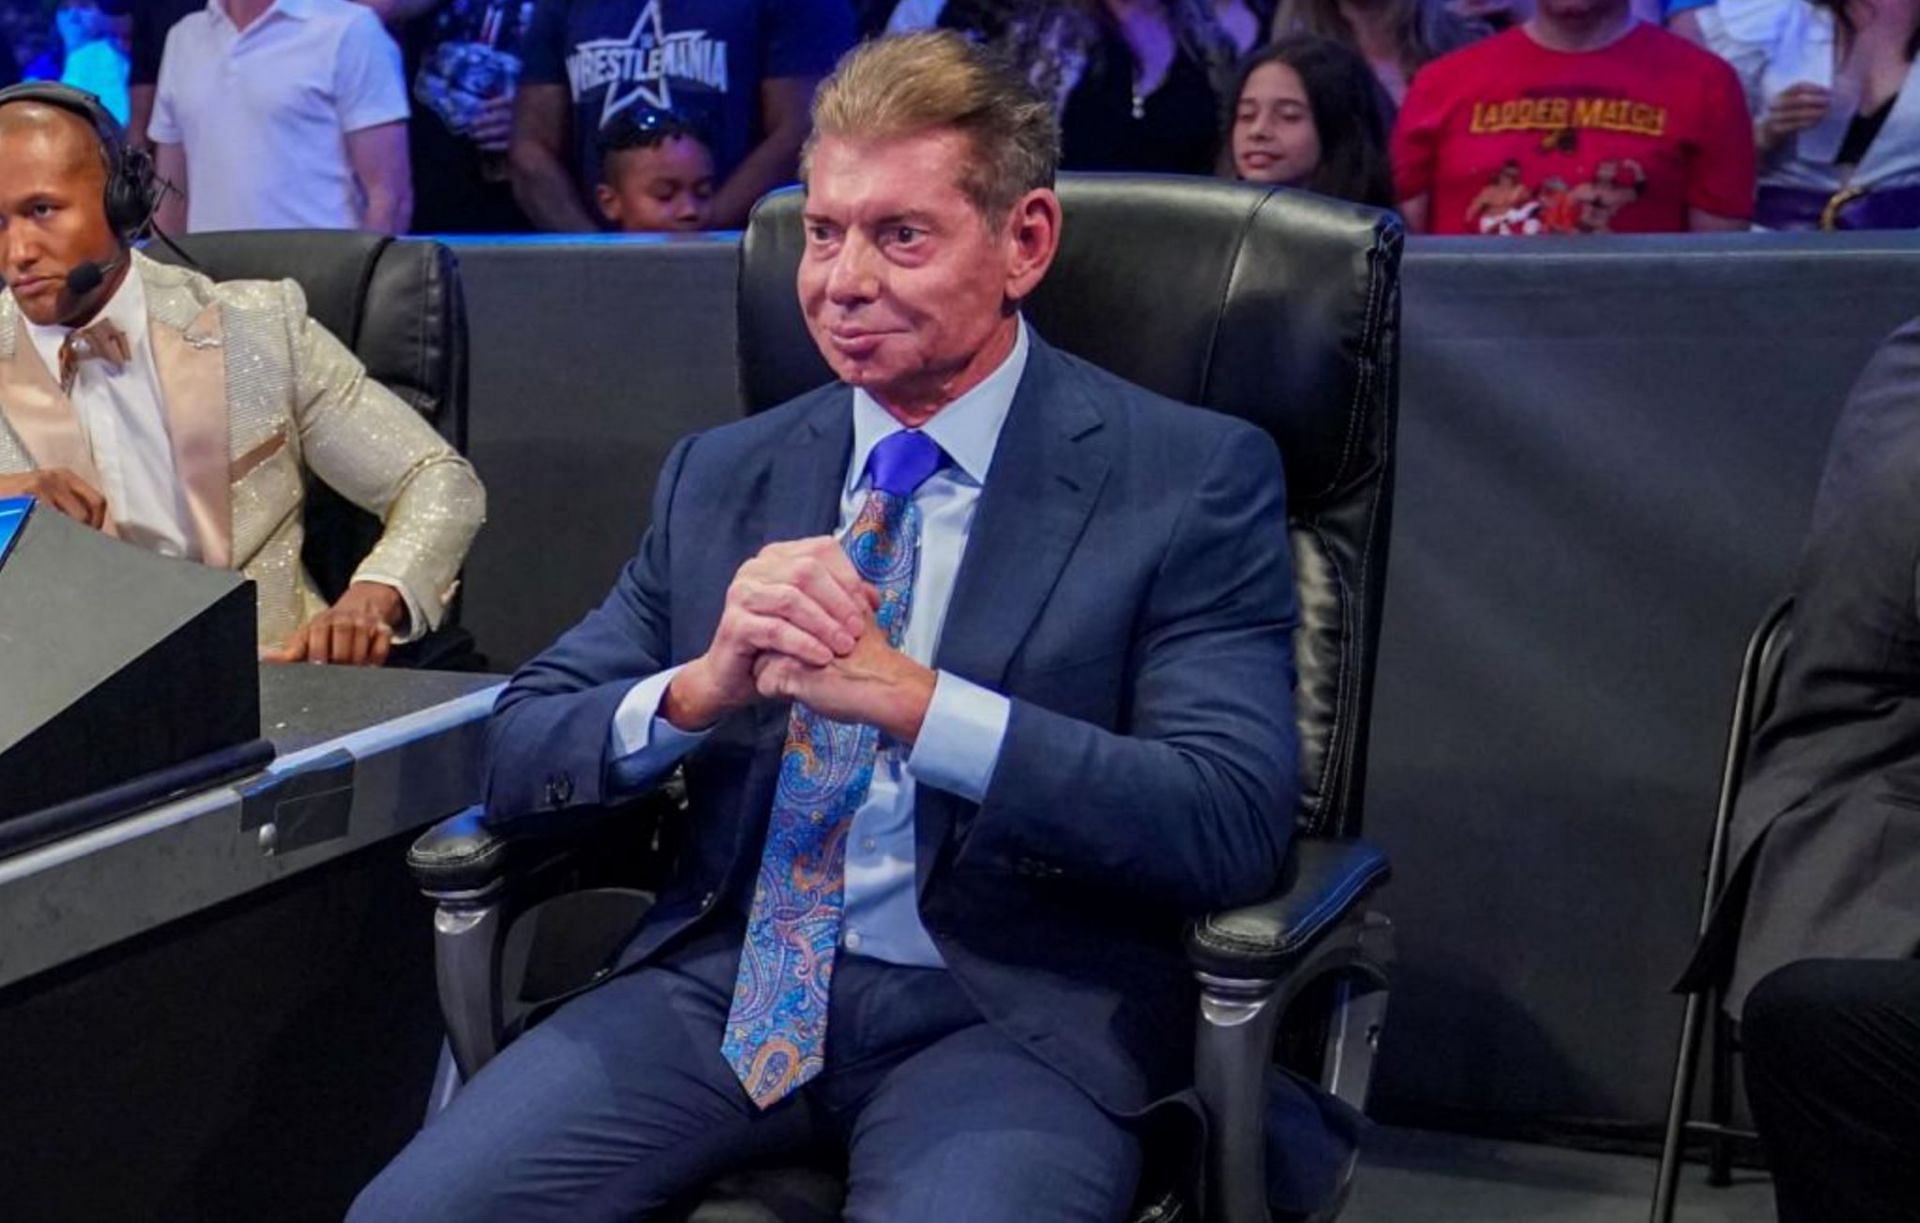 Vince McMahon competed at WrestleMania 38